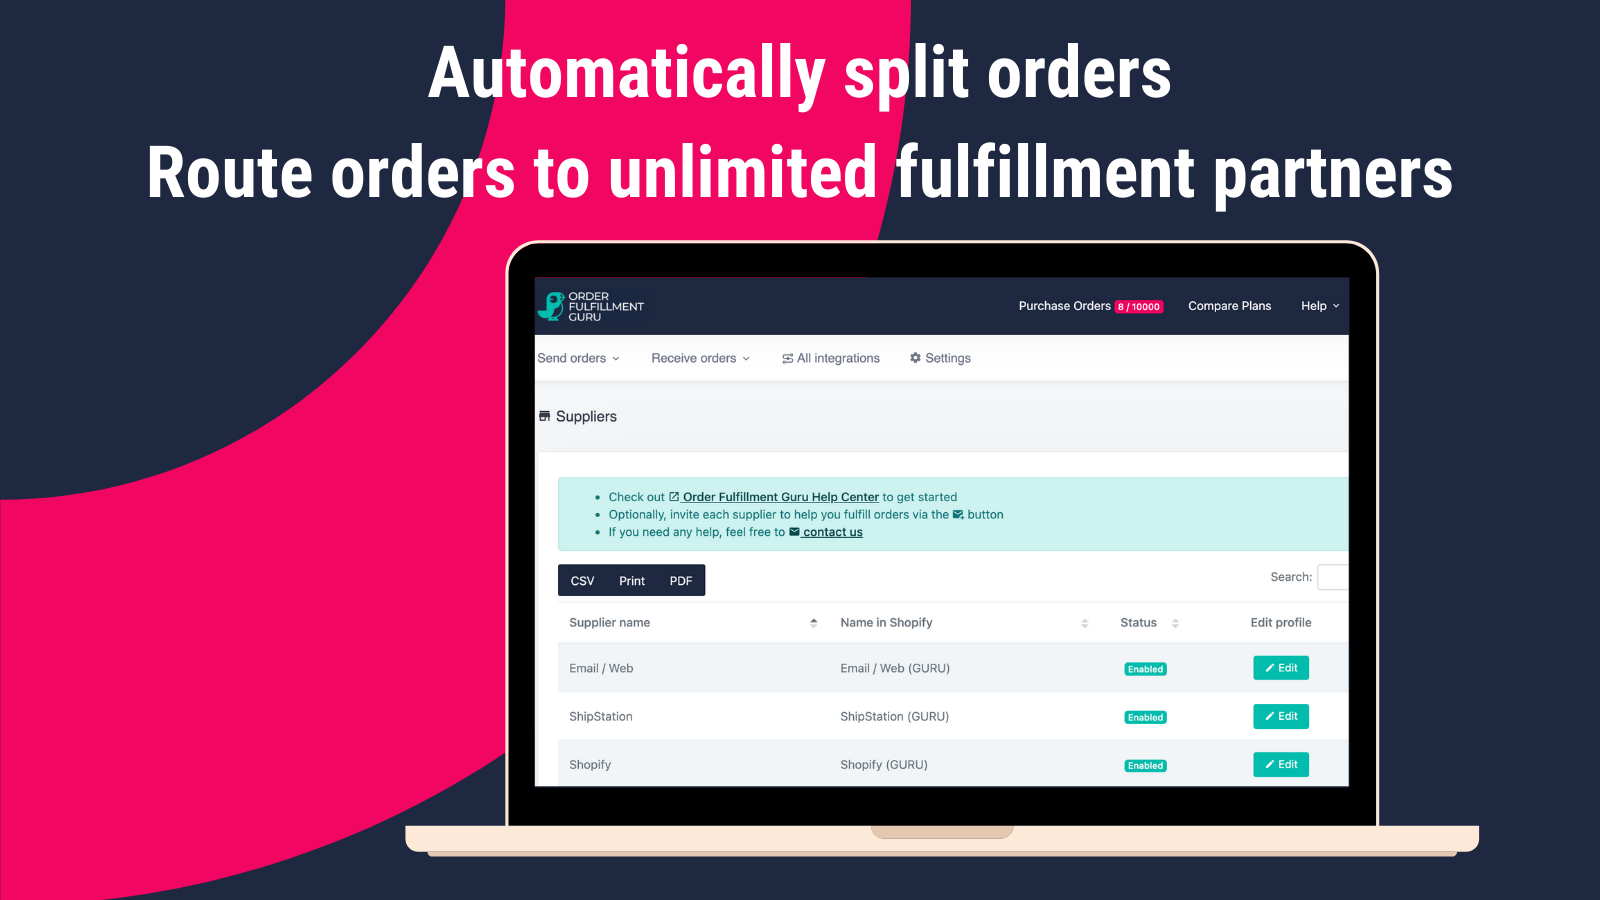 Automatically split orders. Route orders to unlimited partners